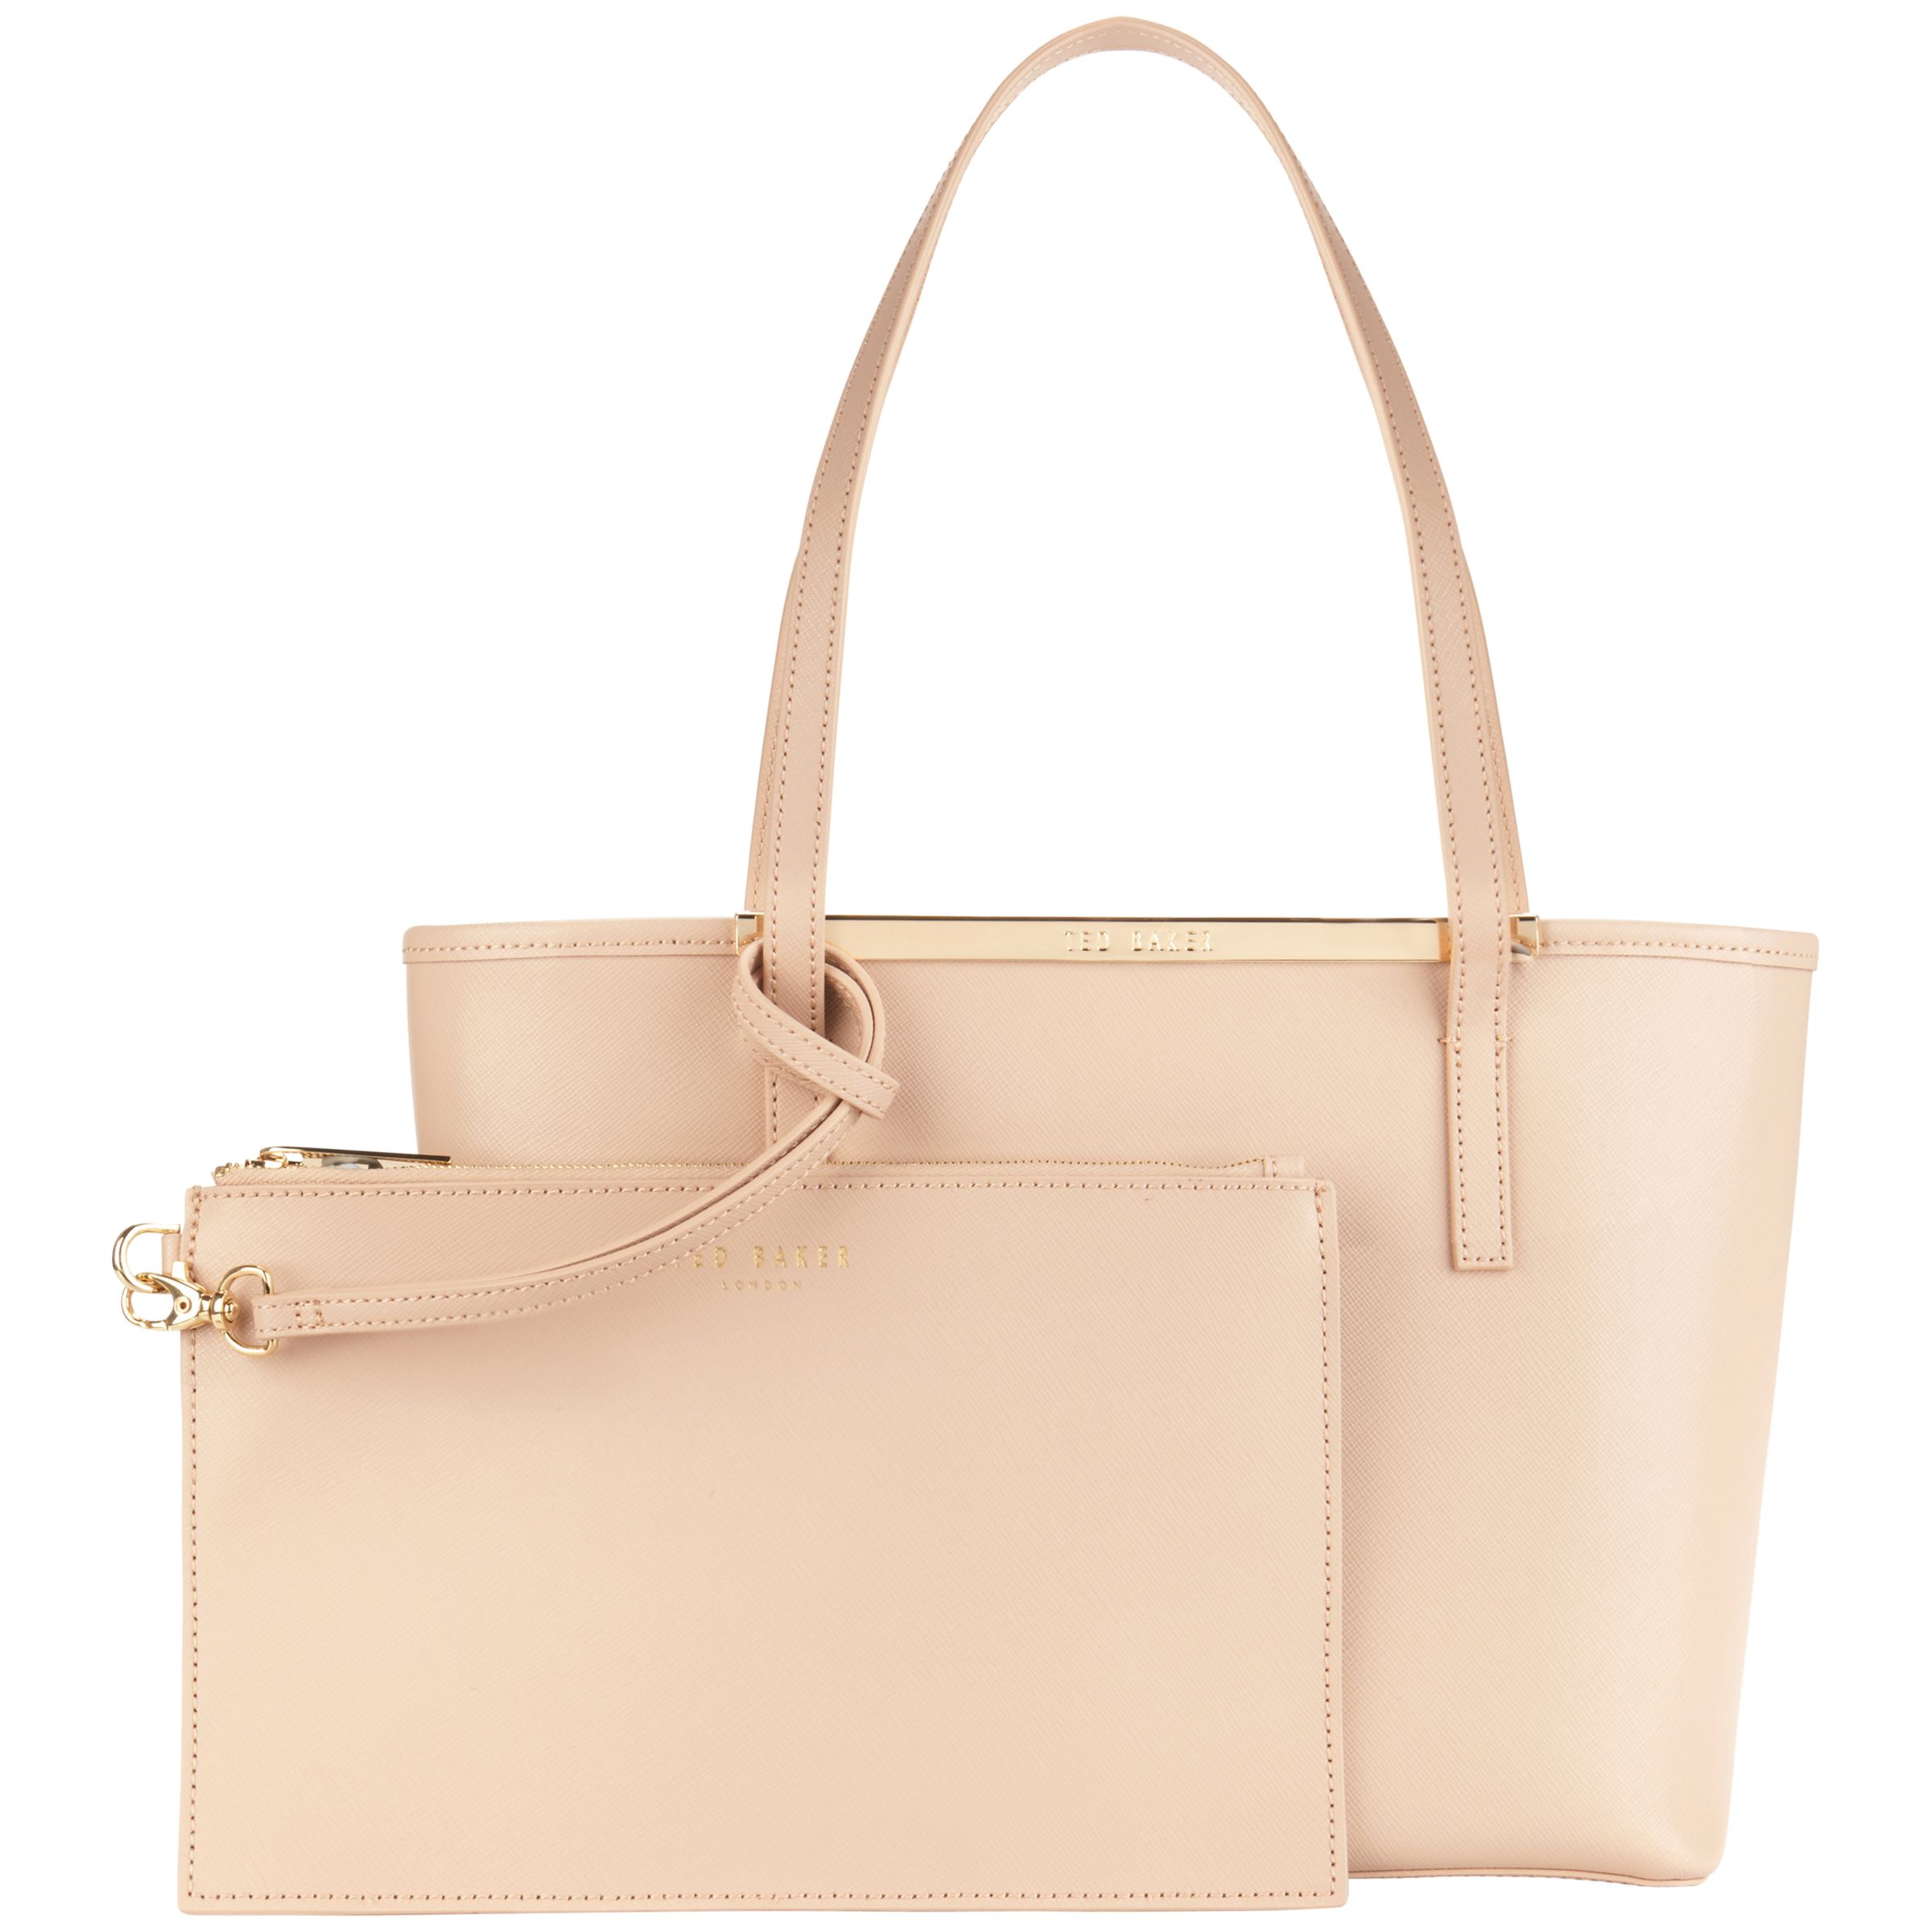 Ted Baker Hailey Small Leather Shopper Bag